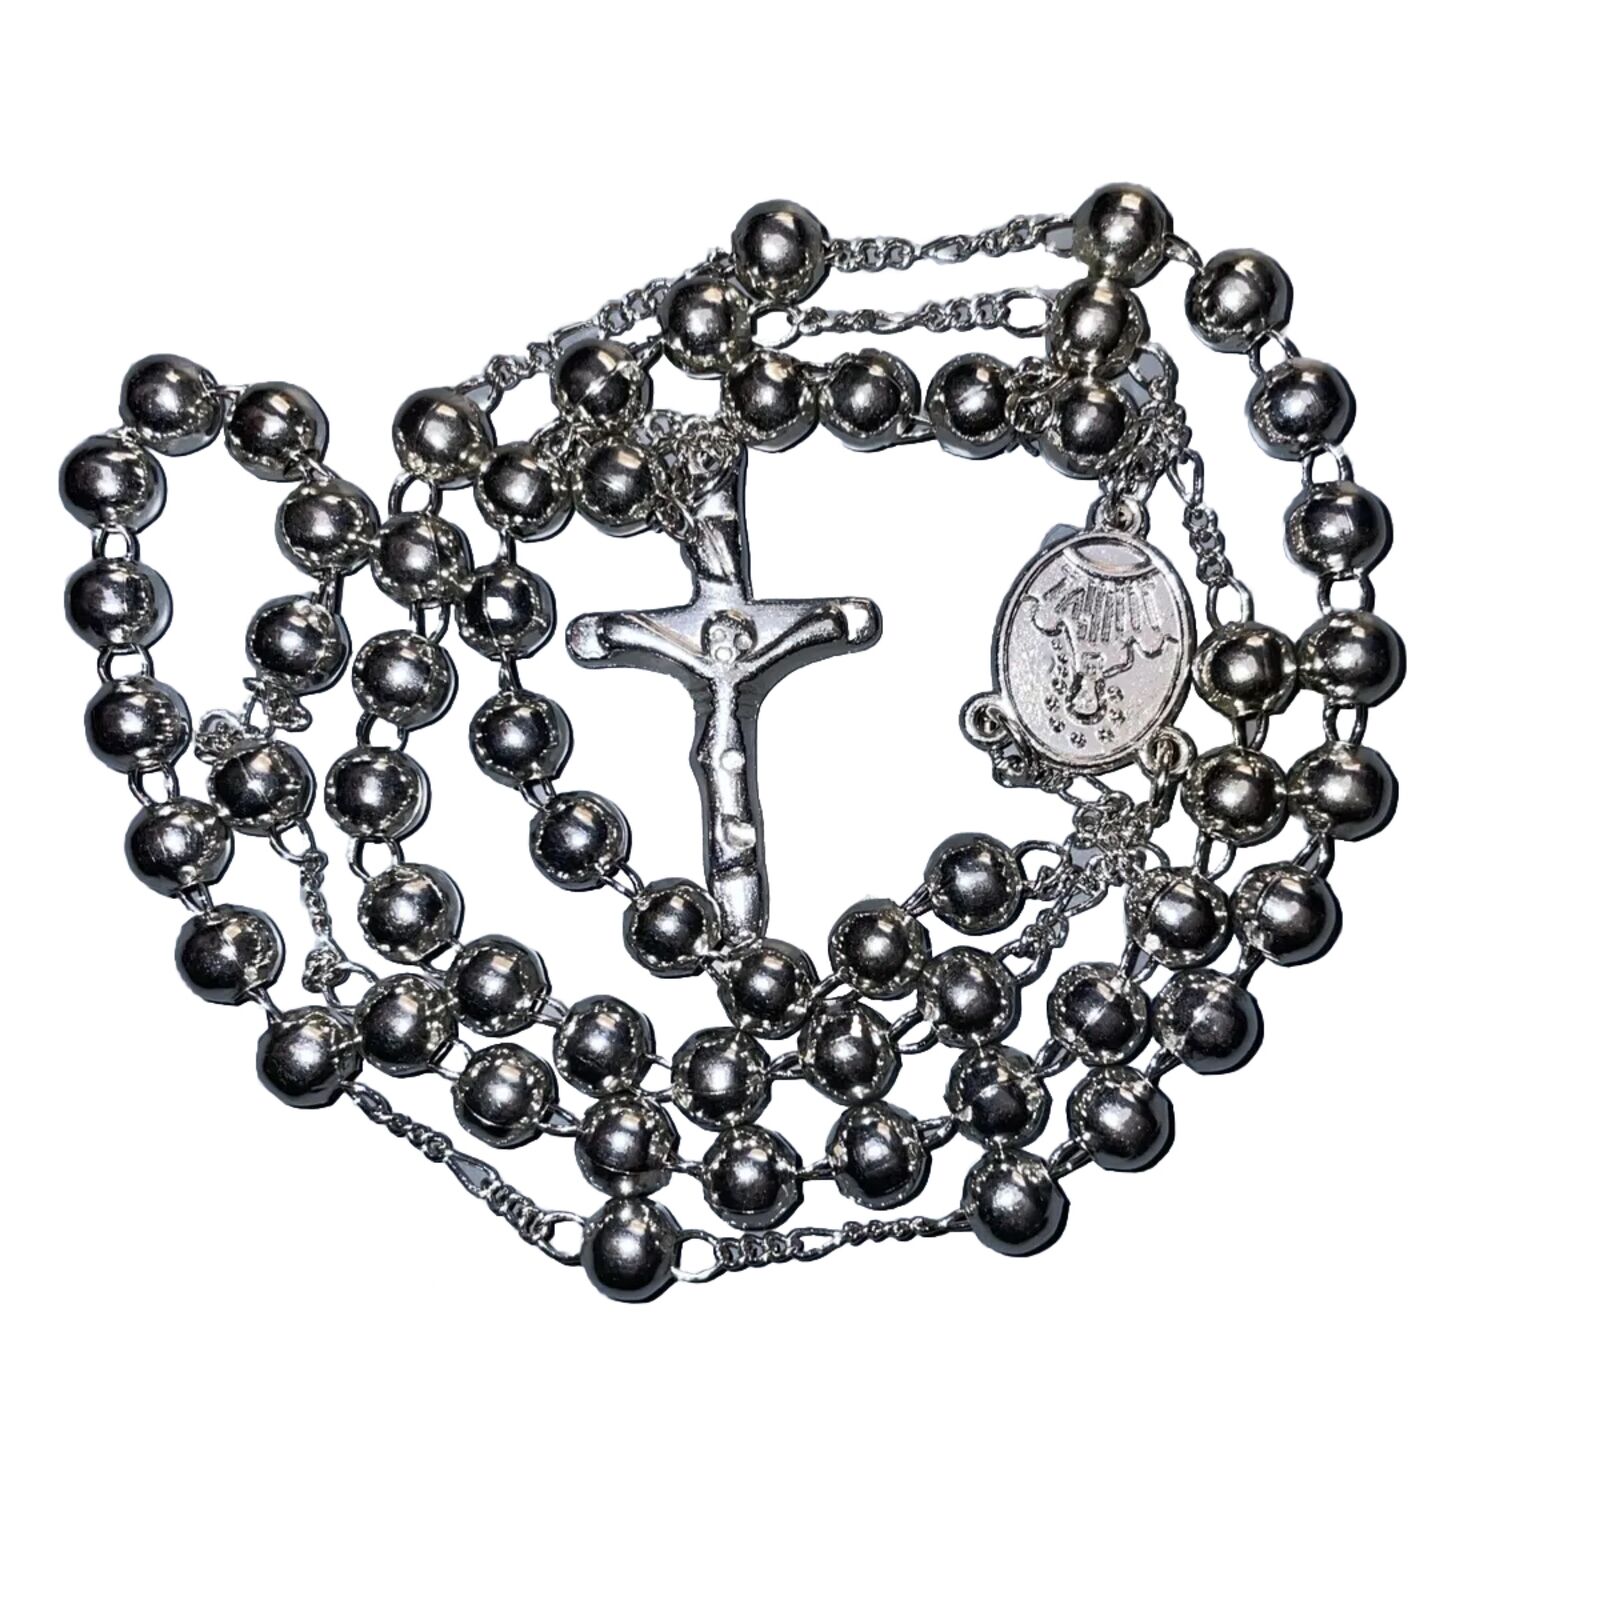 Silver Stainless Steel Beads Rosary Blessed Mother Catholic Mens Women’s Cross